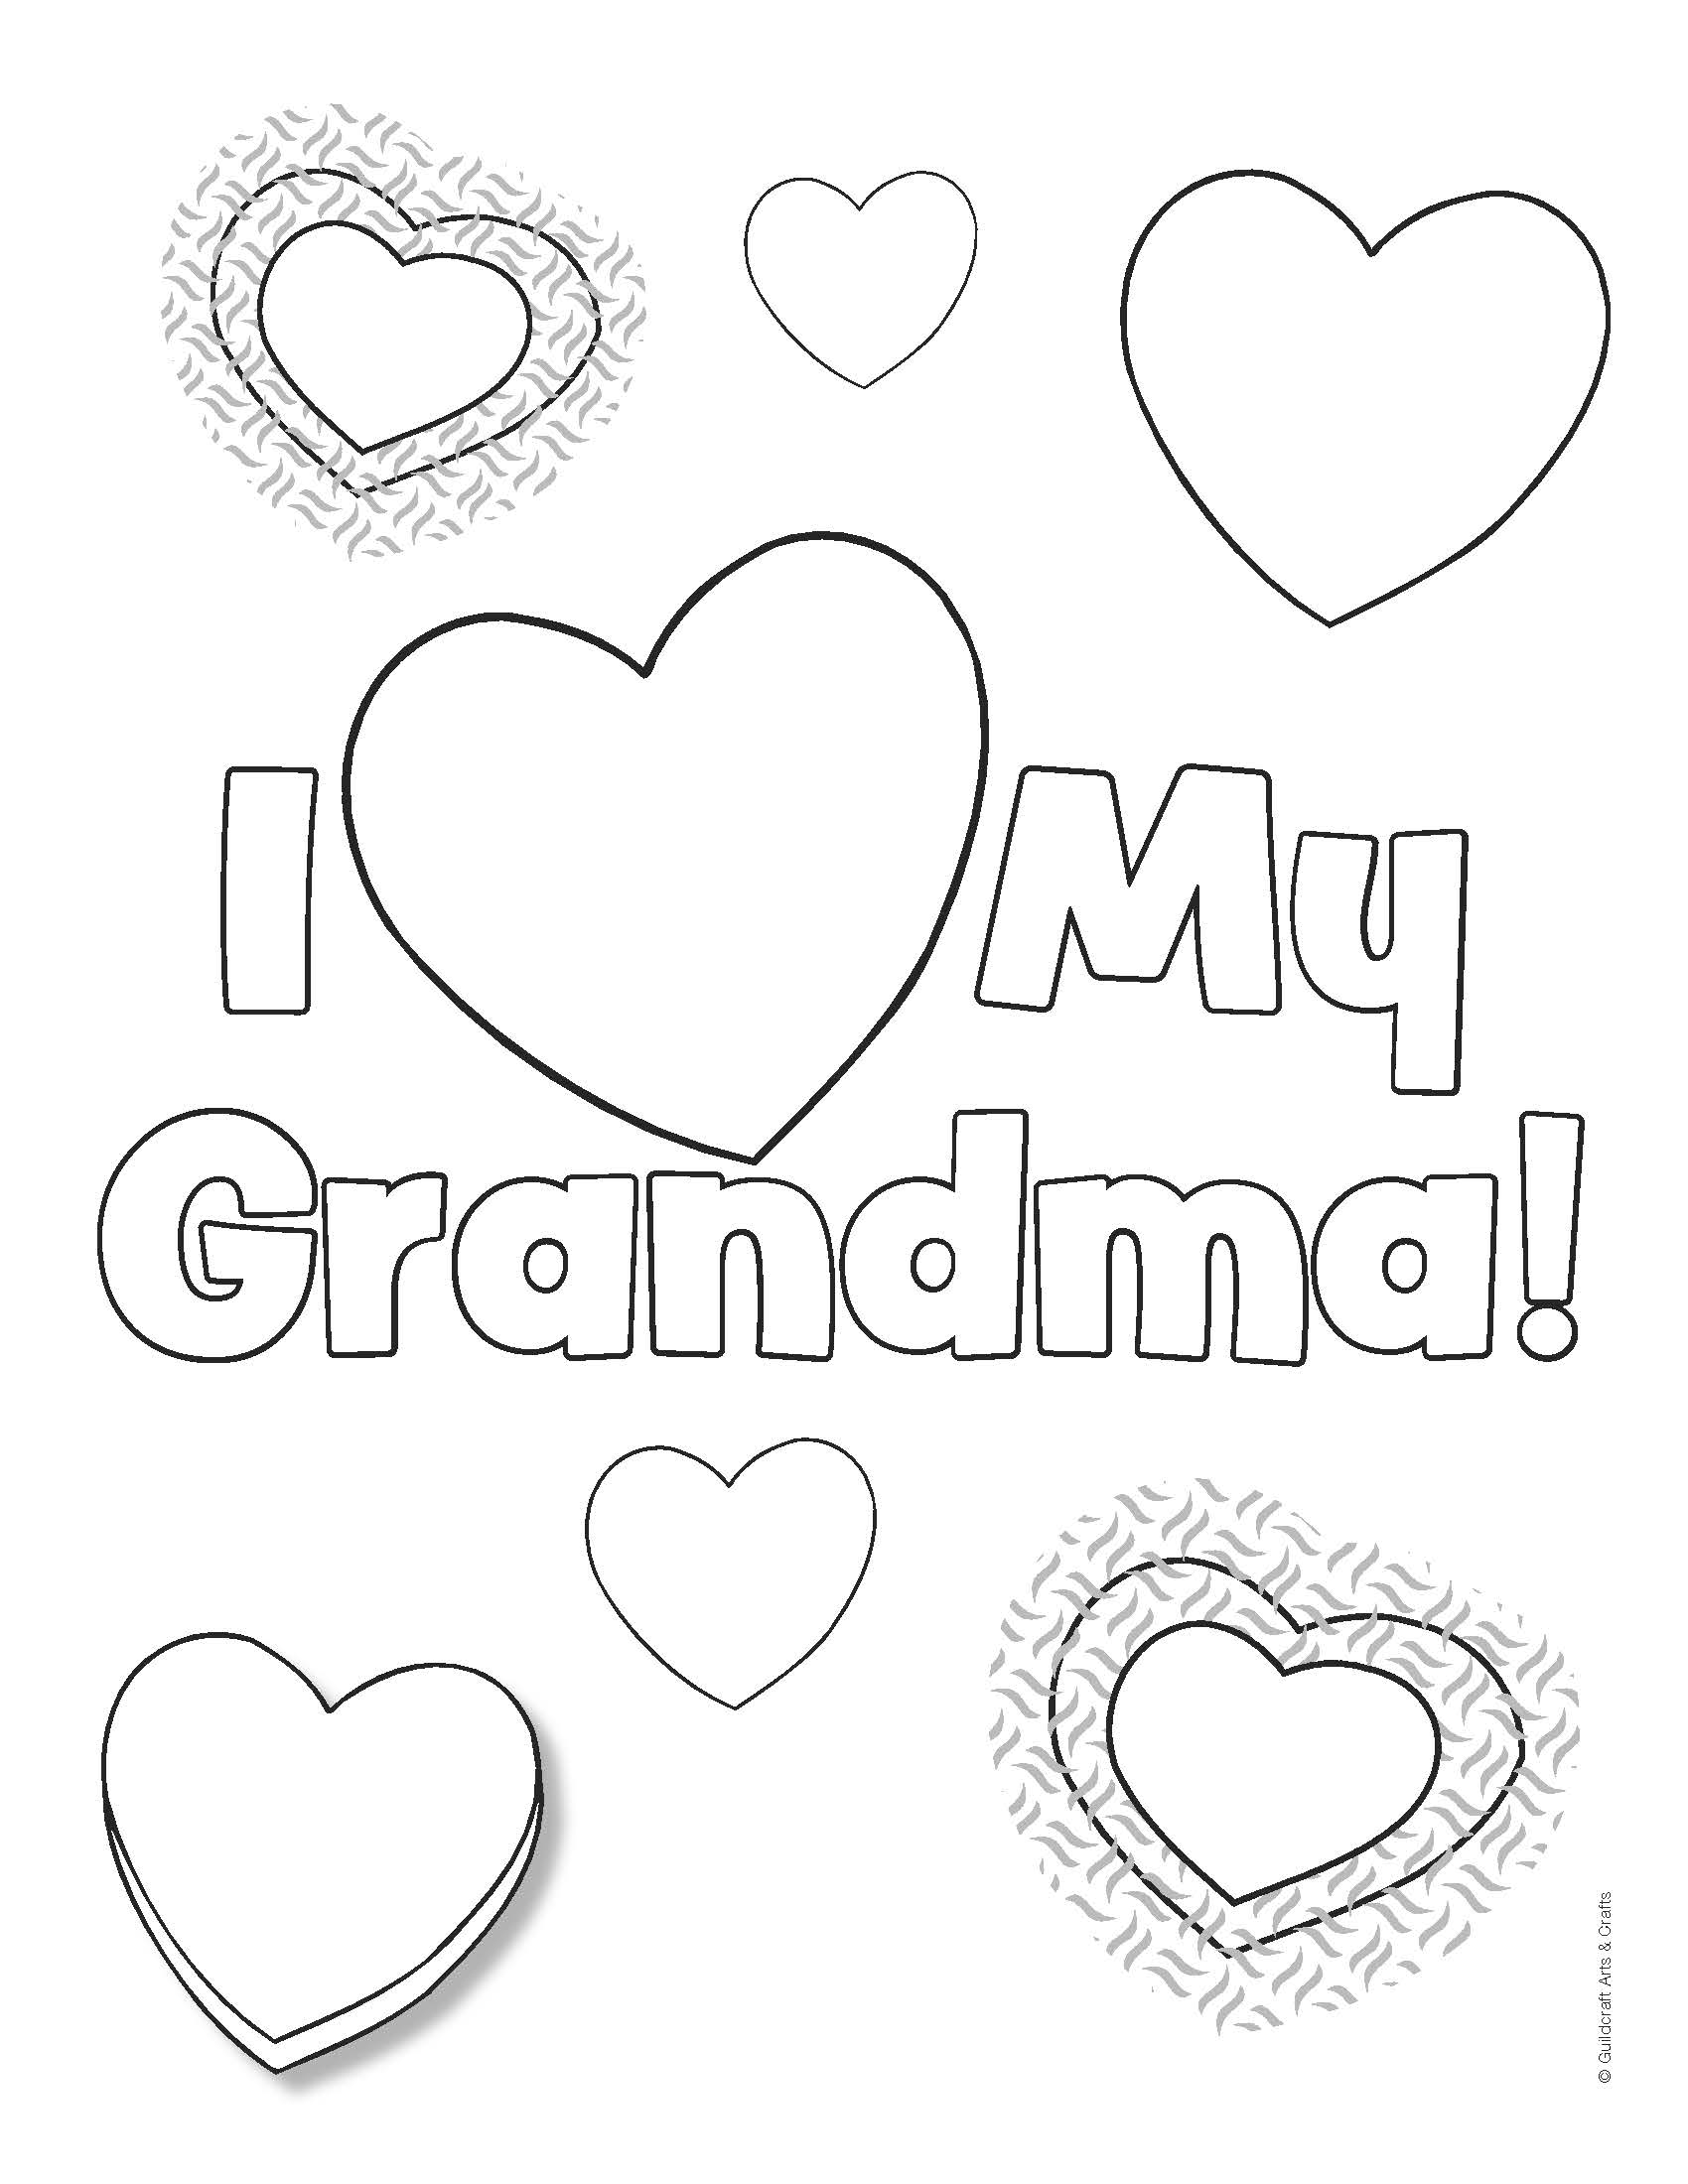 granny-coloring-pages-at-getcolorings-free-printable-colorings-pages-to-print-and-color